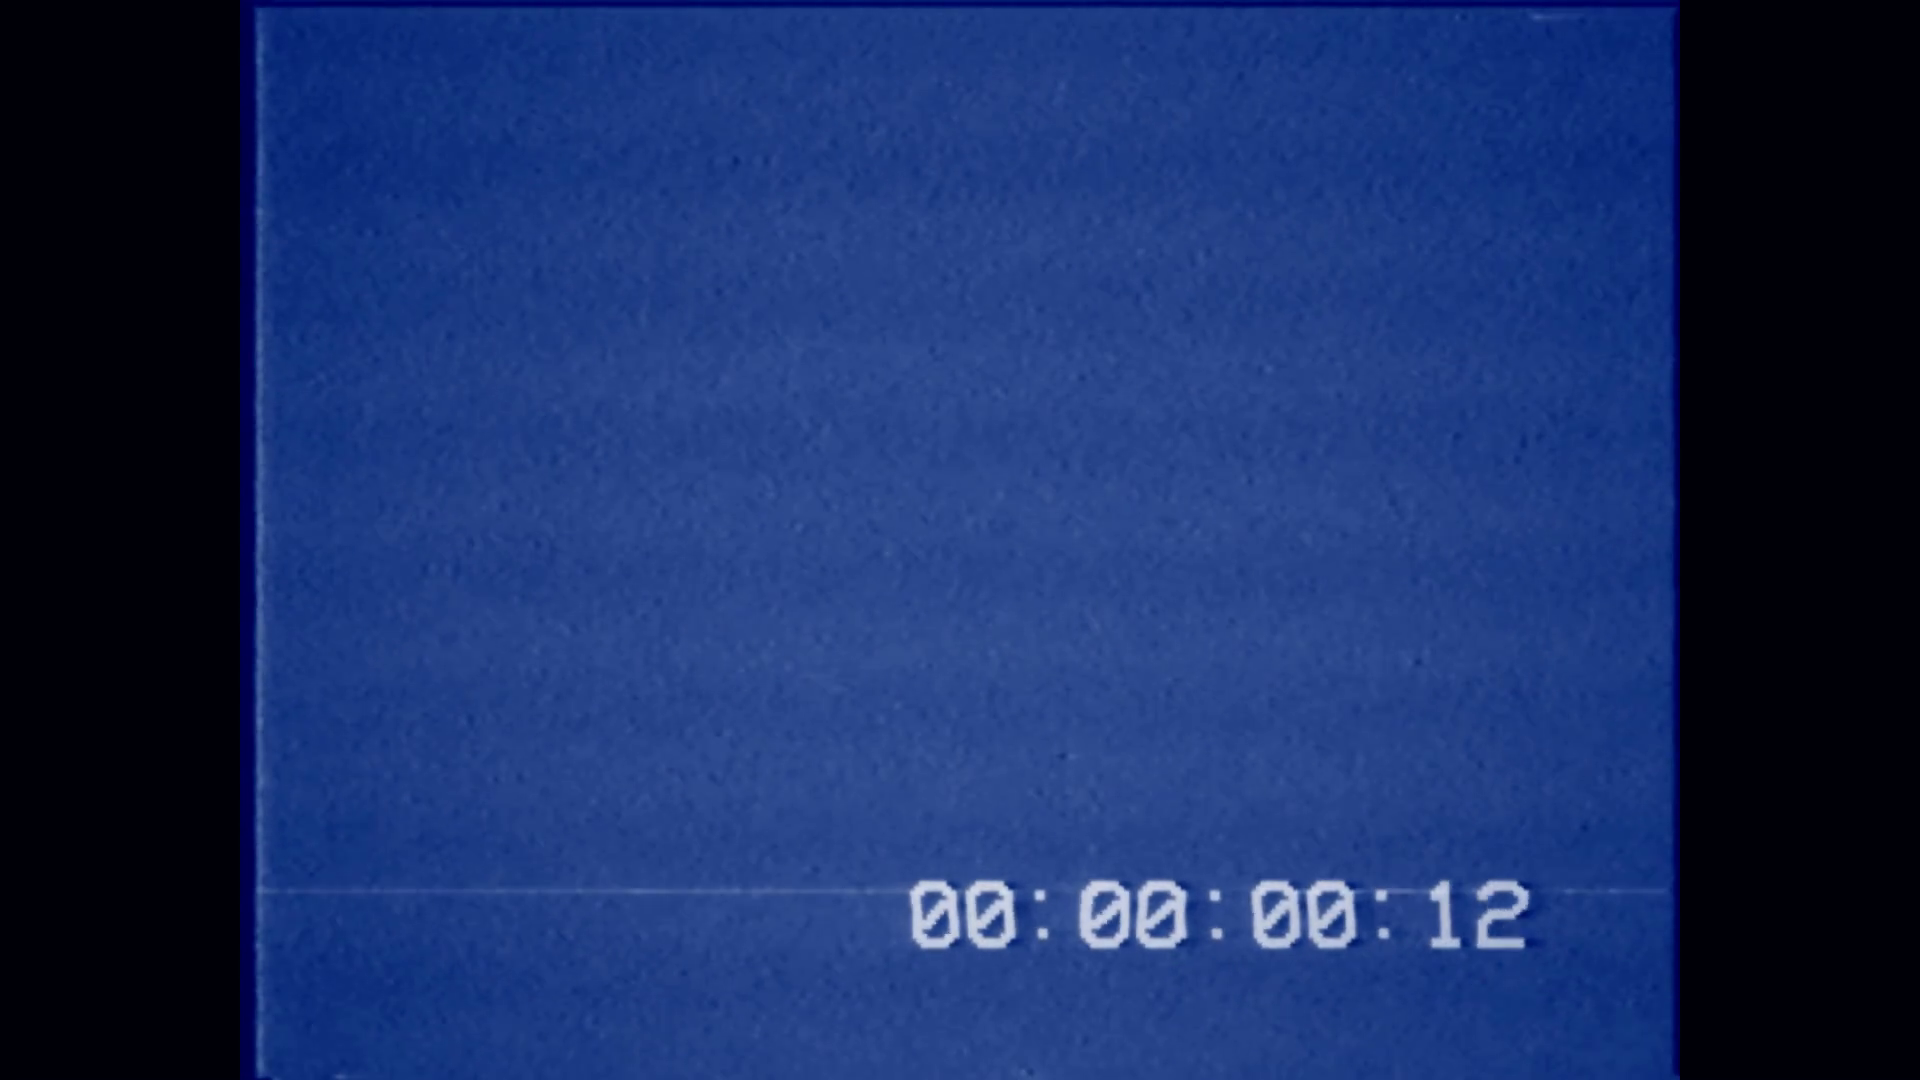 Vhs Bad 30 Seconds Timecode Blue. An Old Bad Vhs Tape Playing. Blue Screen With Timecode. A Vintage Background For Videos, A Retro Element. - Vhs, Transparent background PNG HD thumbnail